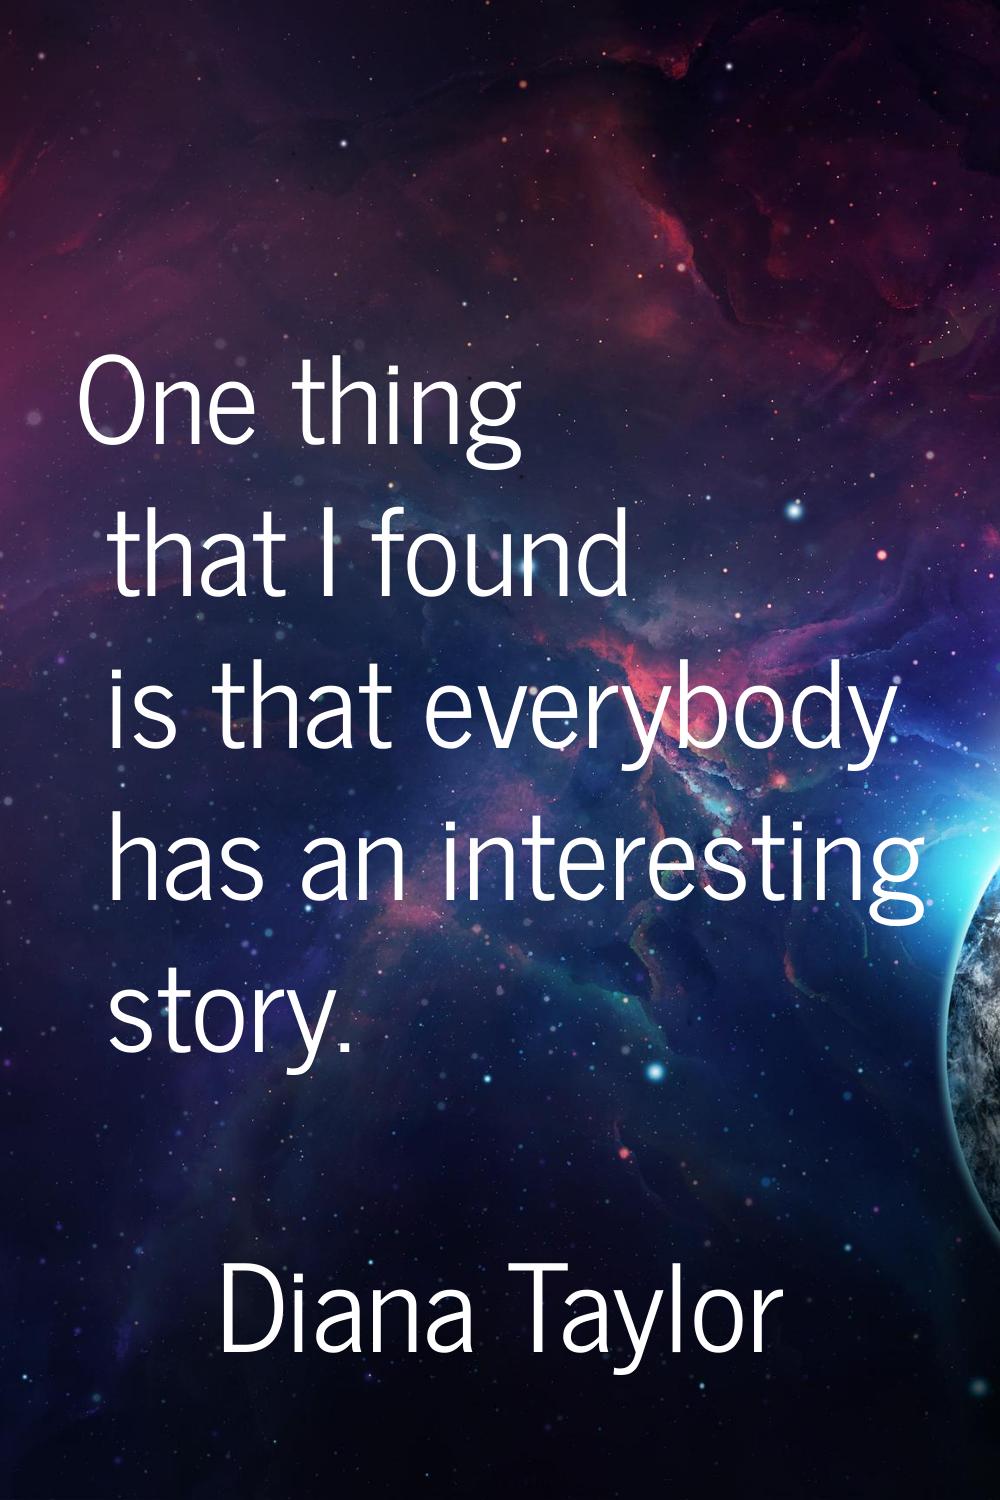 One thing that I found is that everybody has an interesting story.